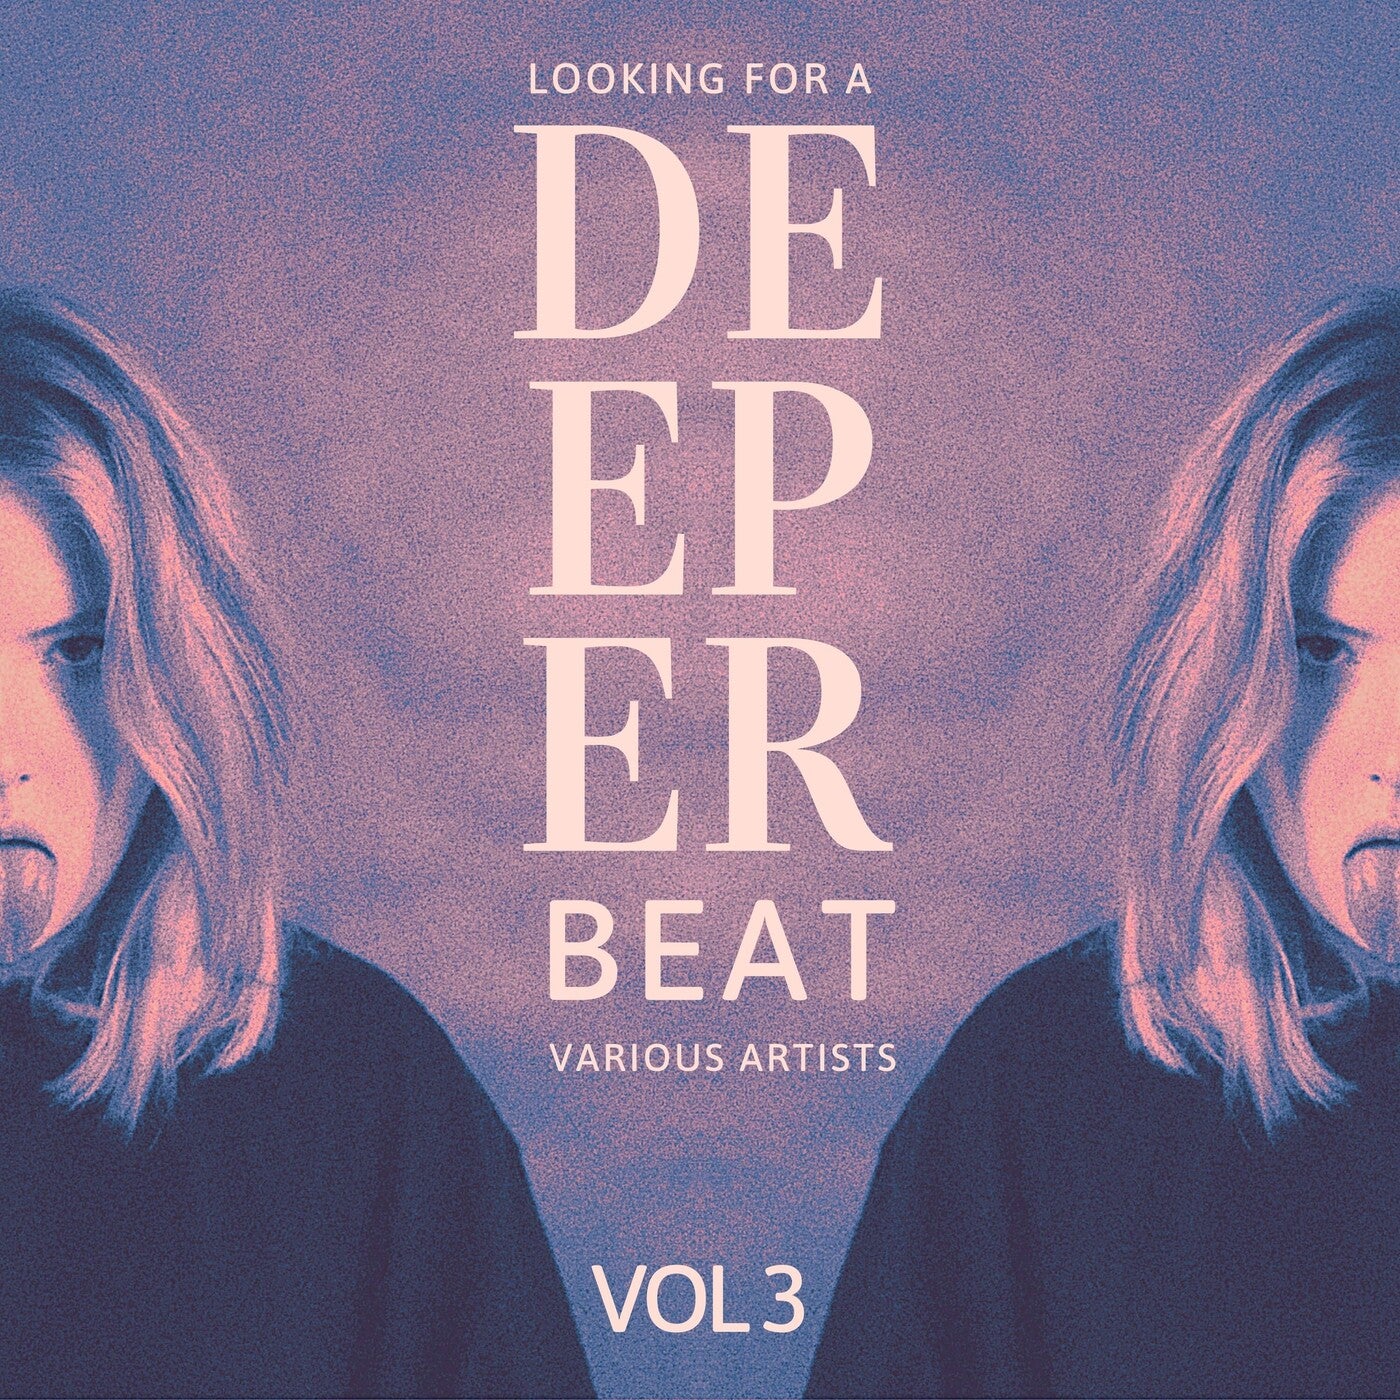 Looking for a Deeper Beat, Vol. 3